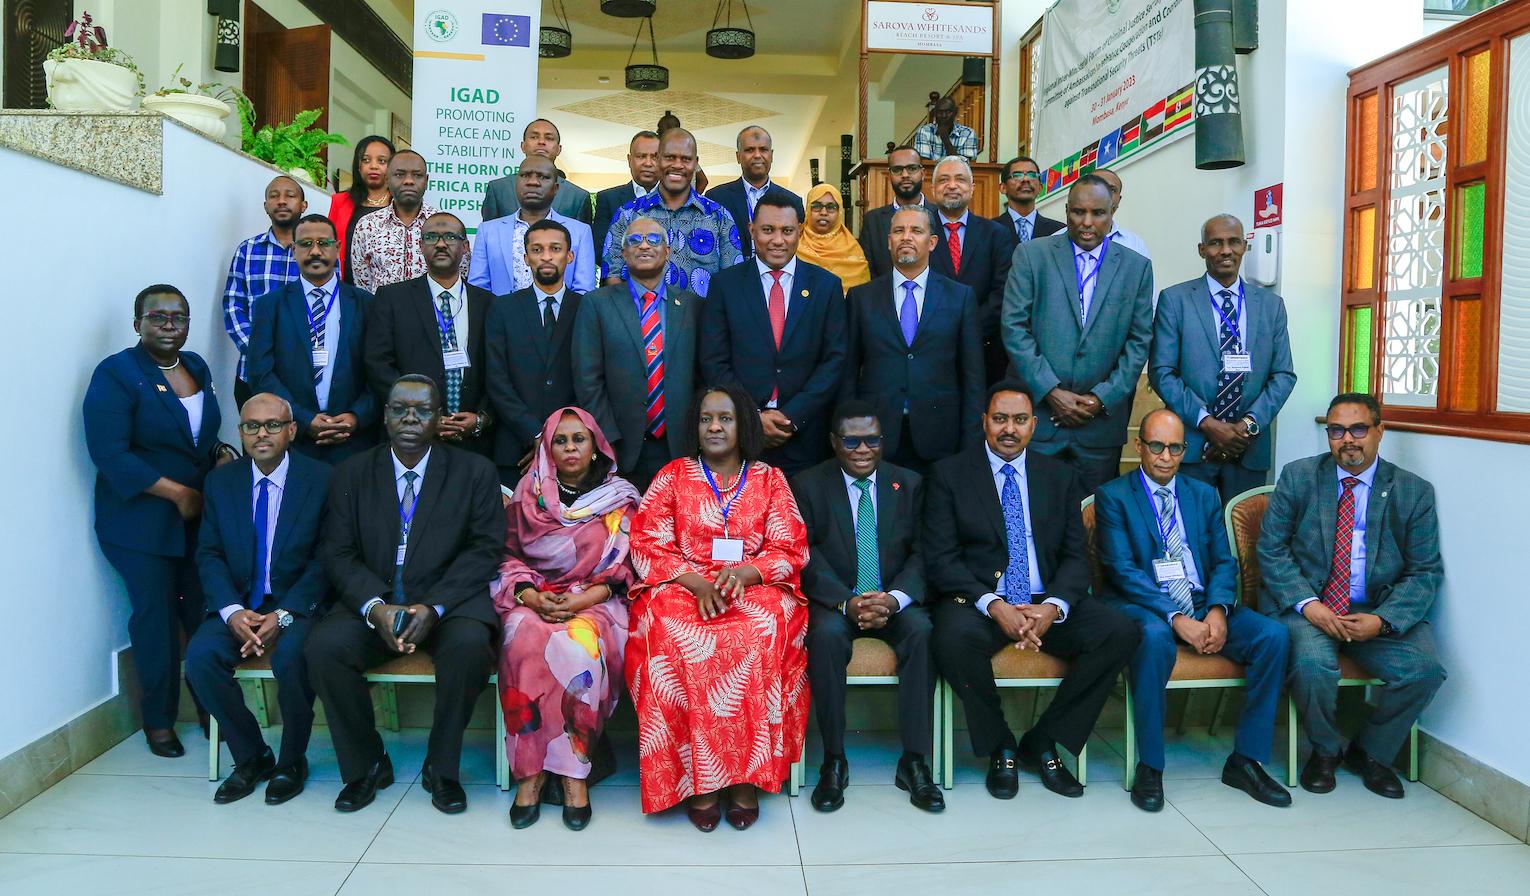 The IGAD SSP Inter-Ministerial Forum on Transnational Security Threats Successfully Concluded in Kenya